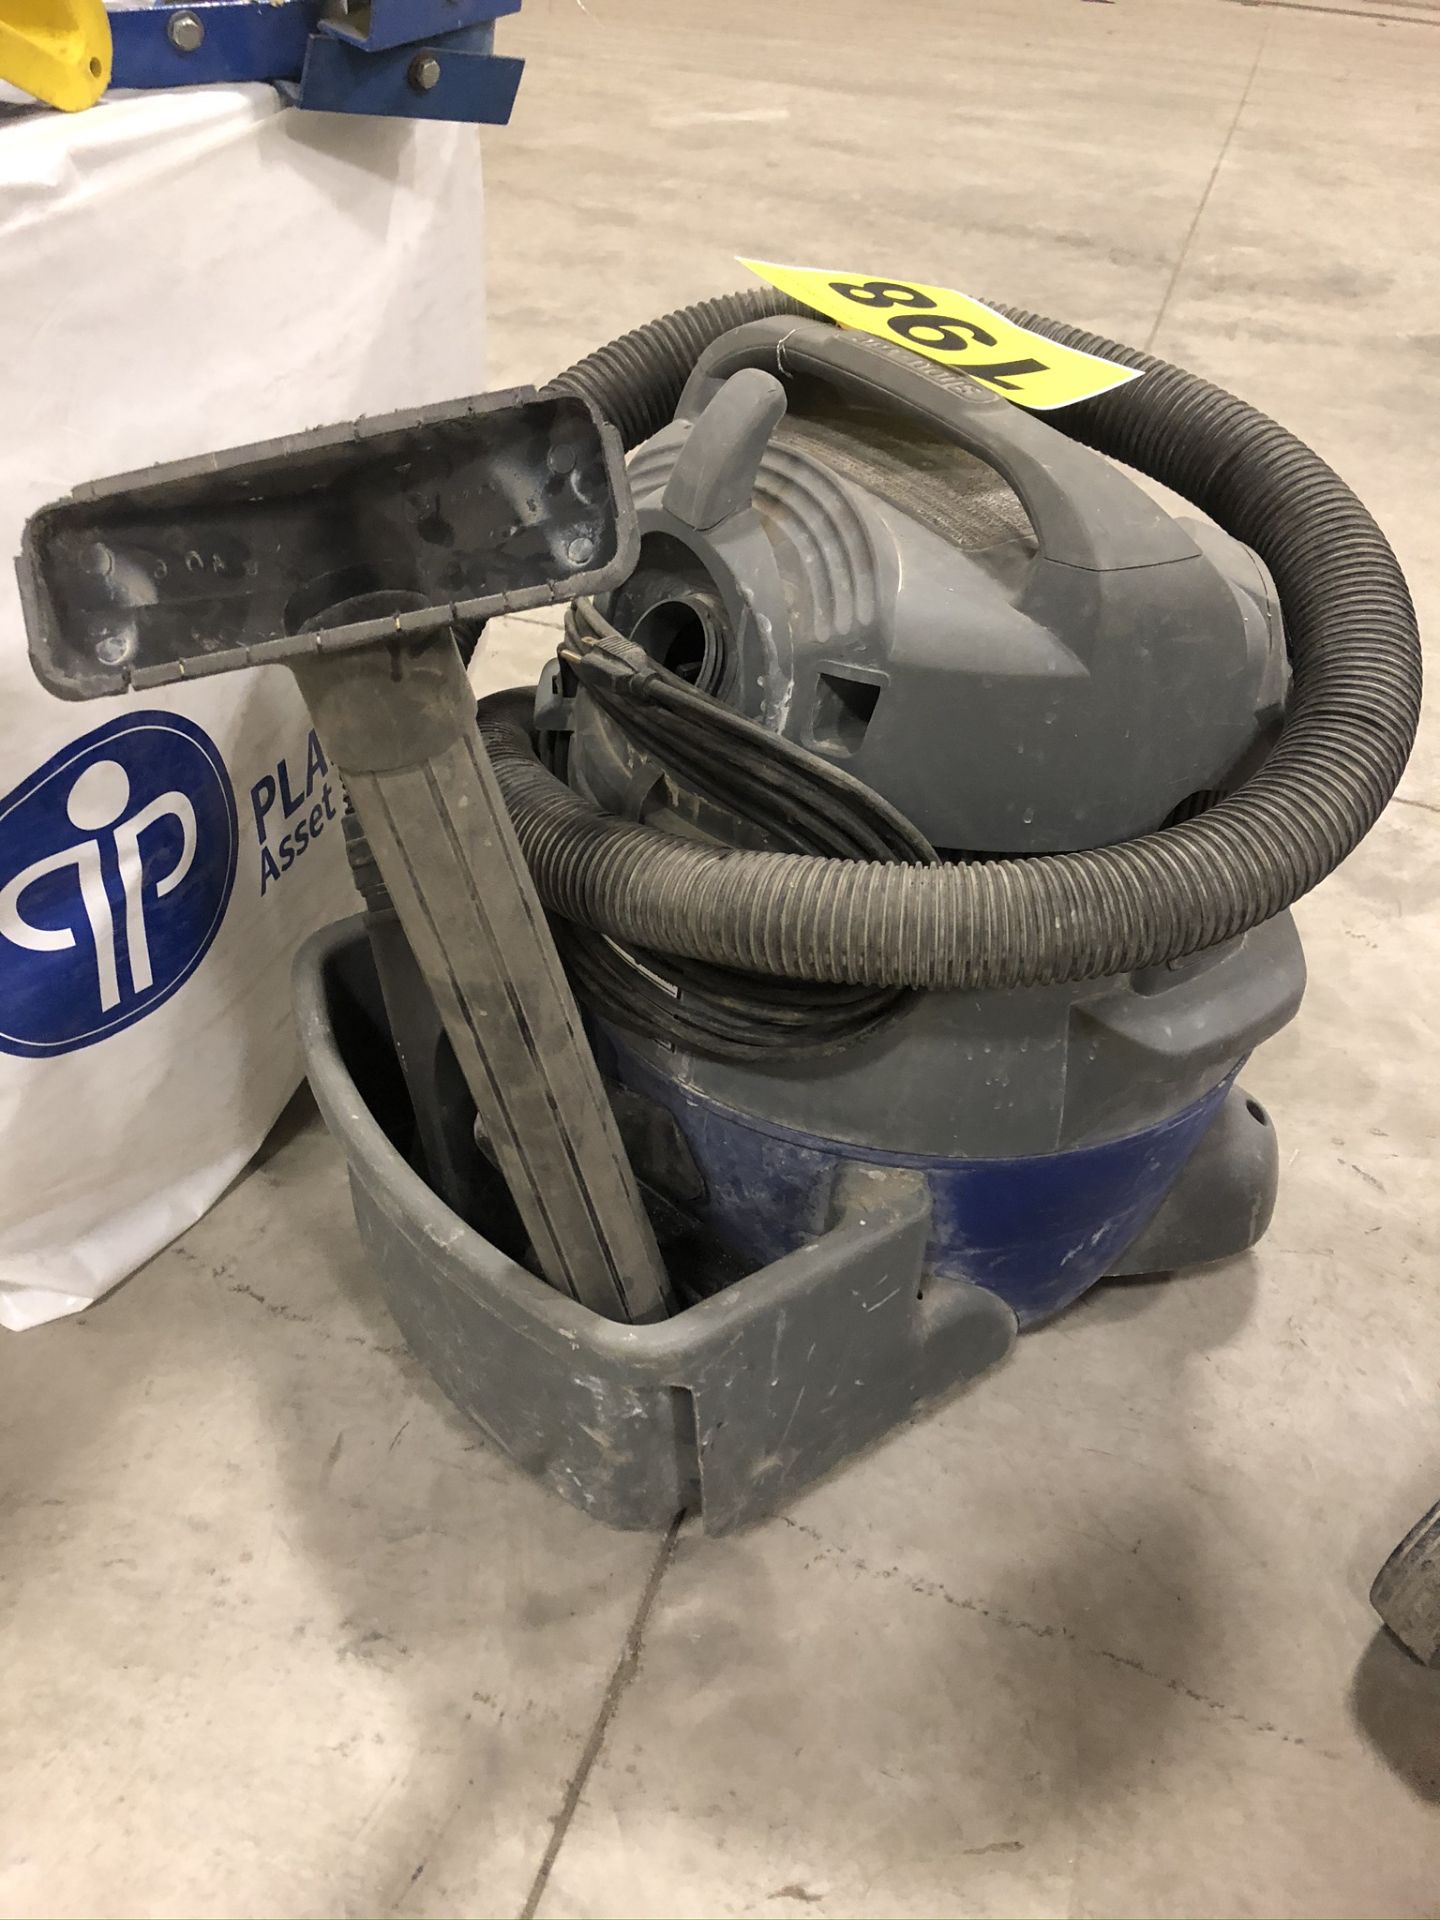 SHOP-VAC, 16LHT650C, WET / DRY VACUUM WITH SPARE BAGS - Image 2 of 3